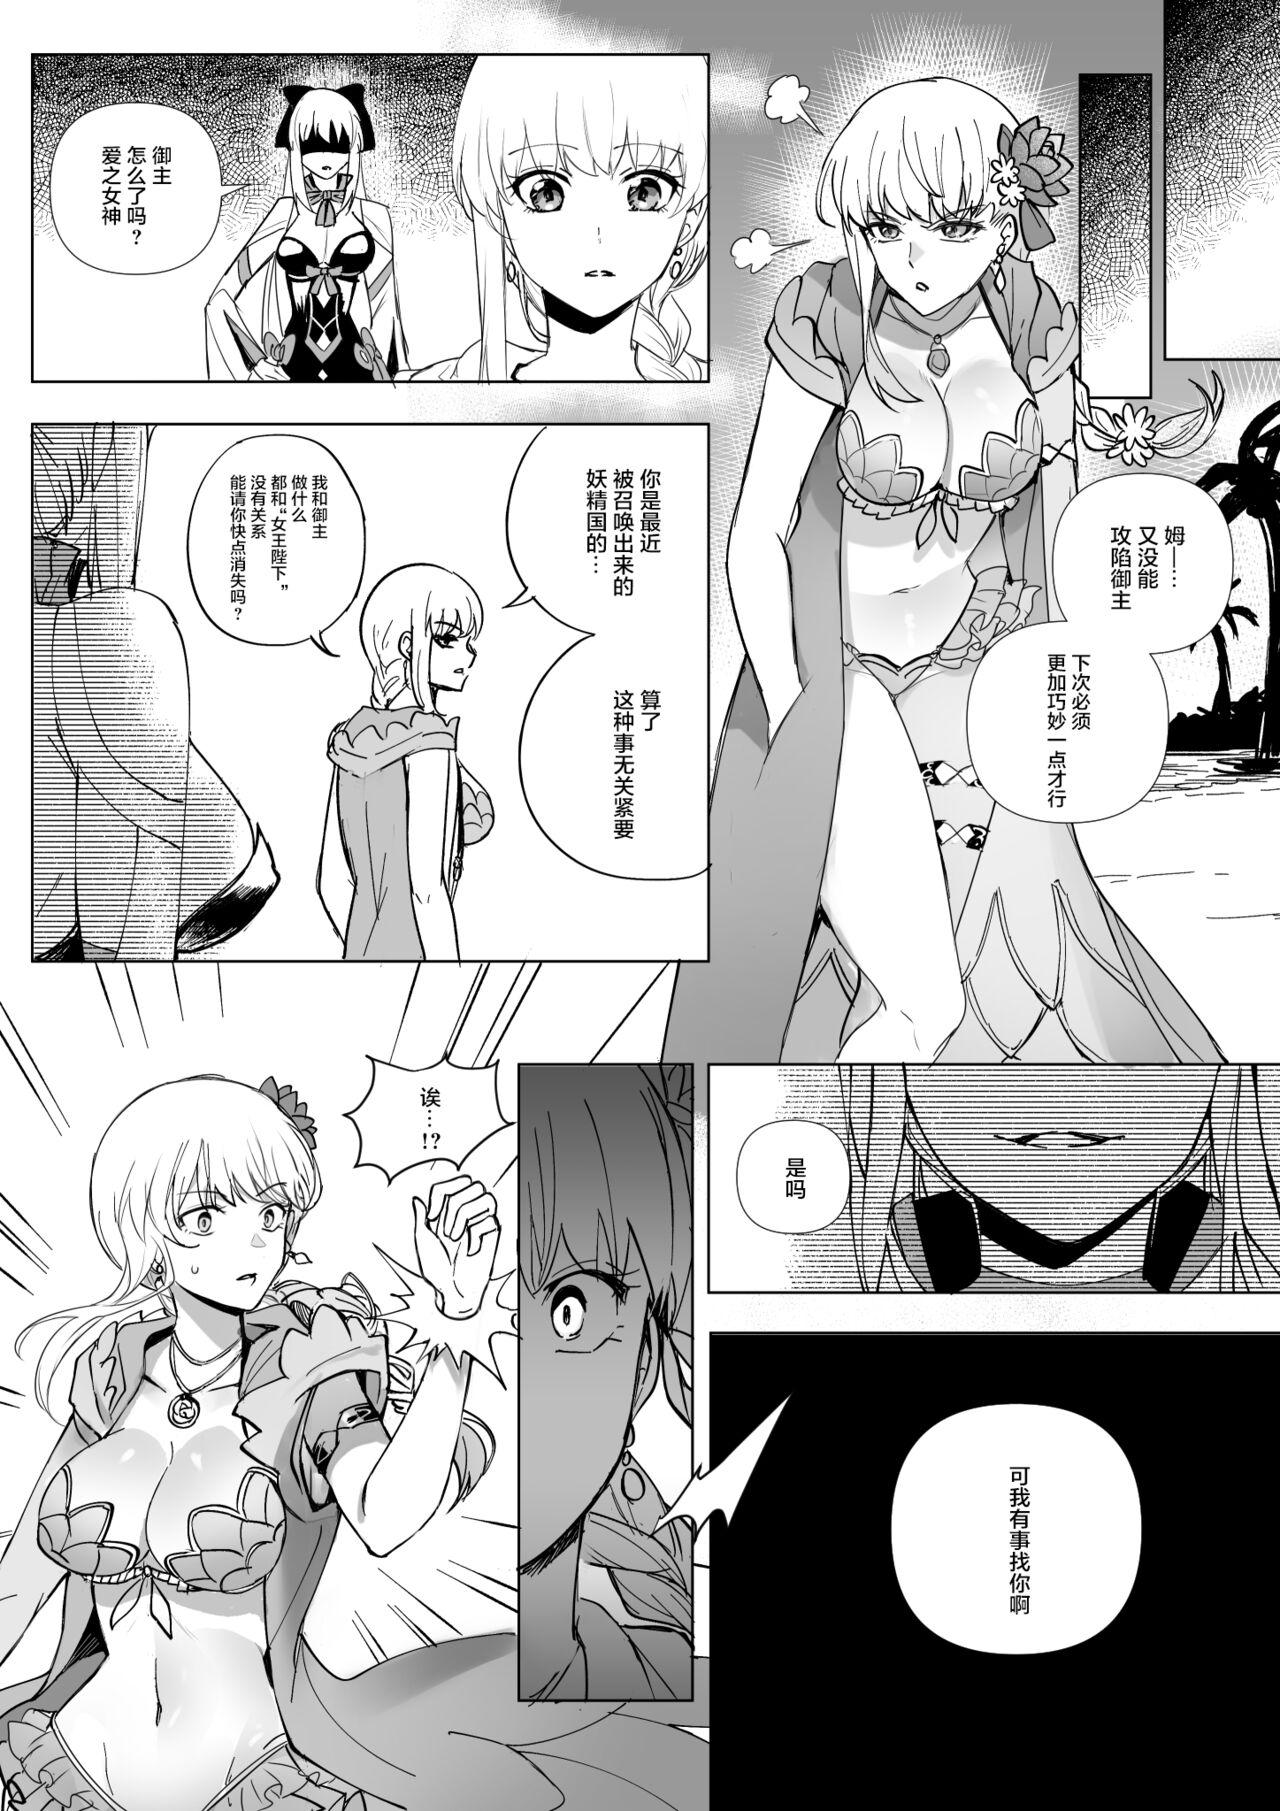 Step Brother FGO モルガン&水着カーマ憑依 - Fate grand order Petite Teenager - Page 5